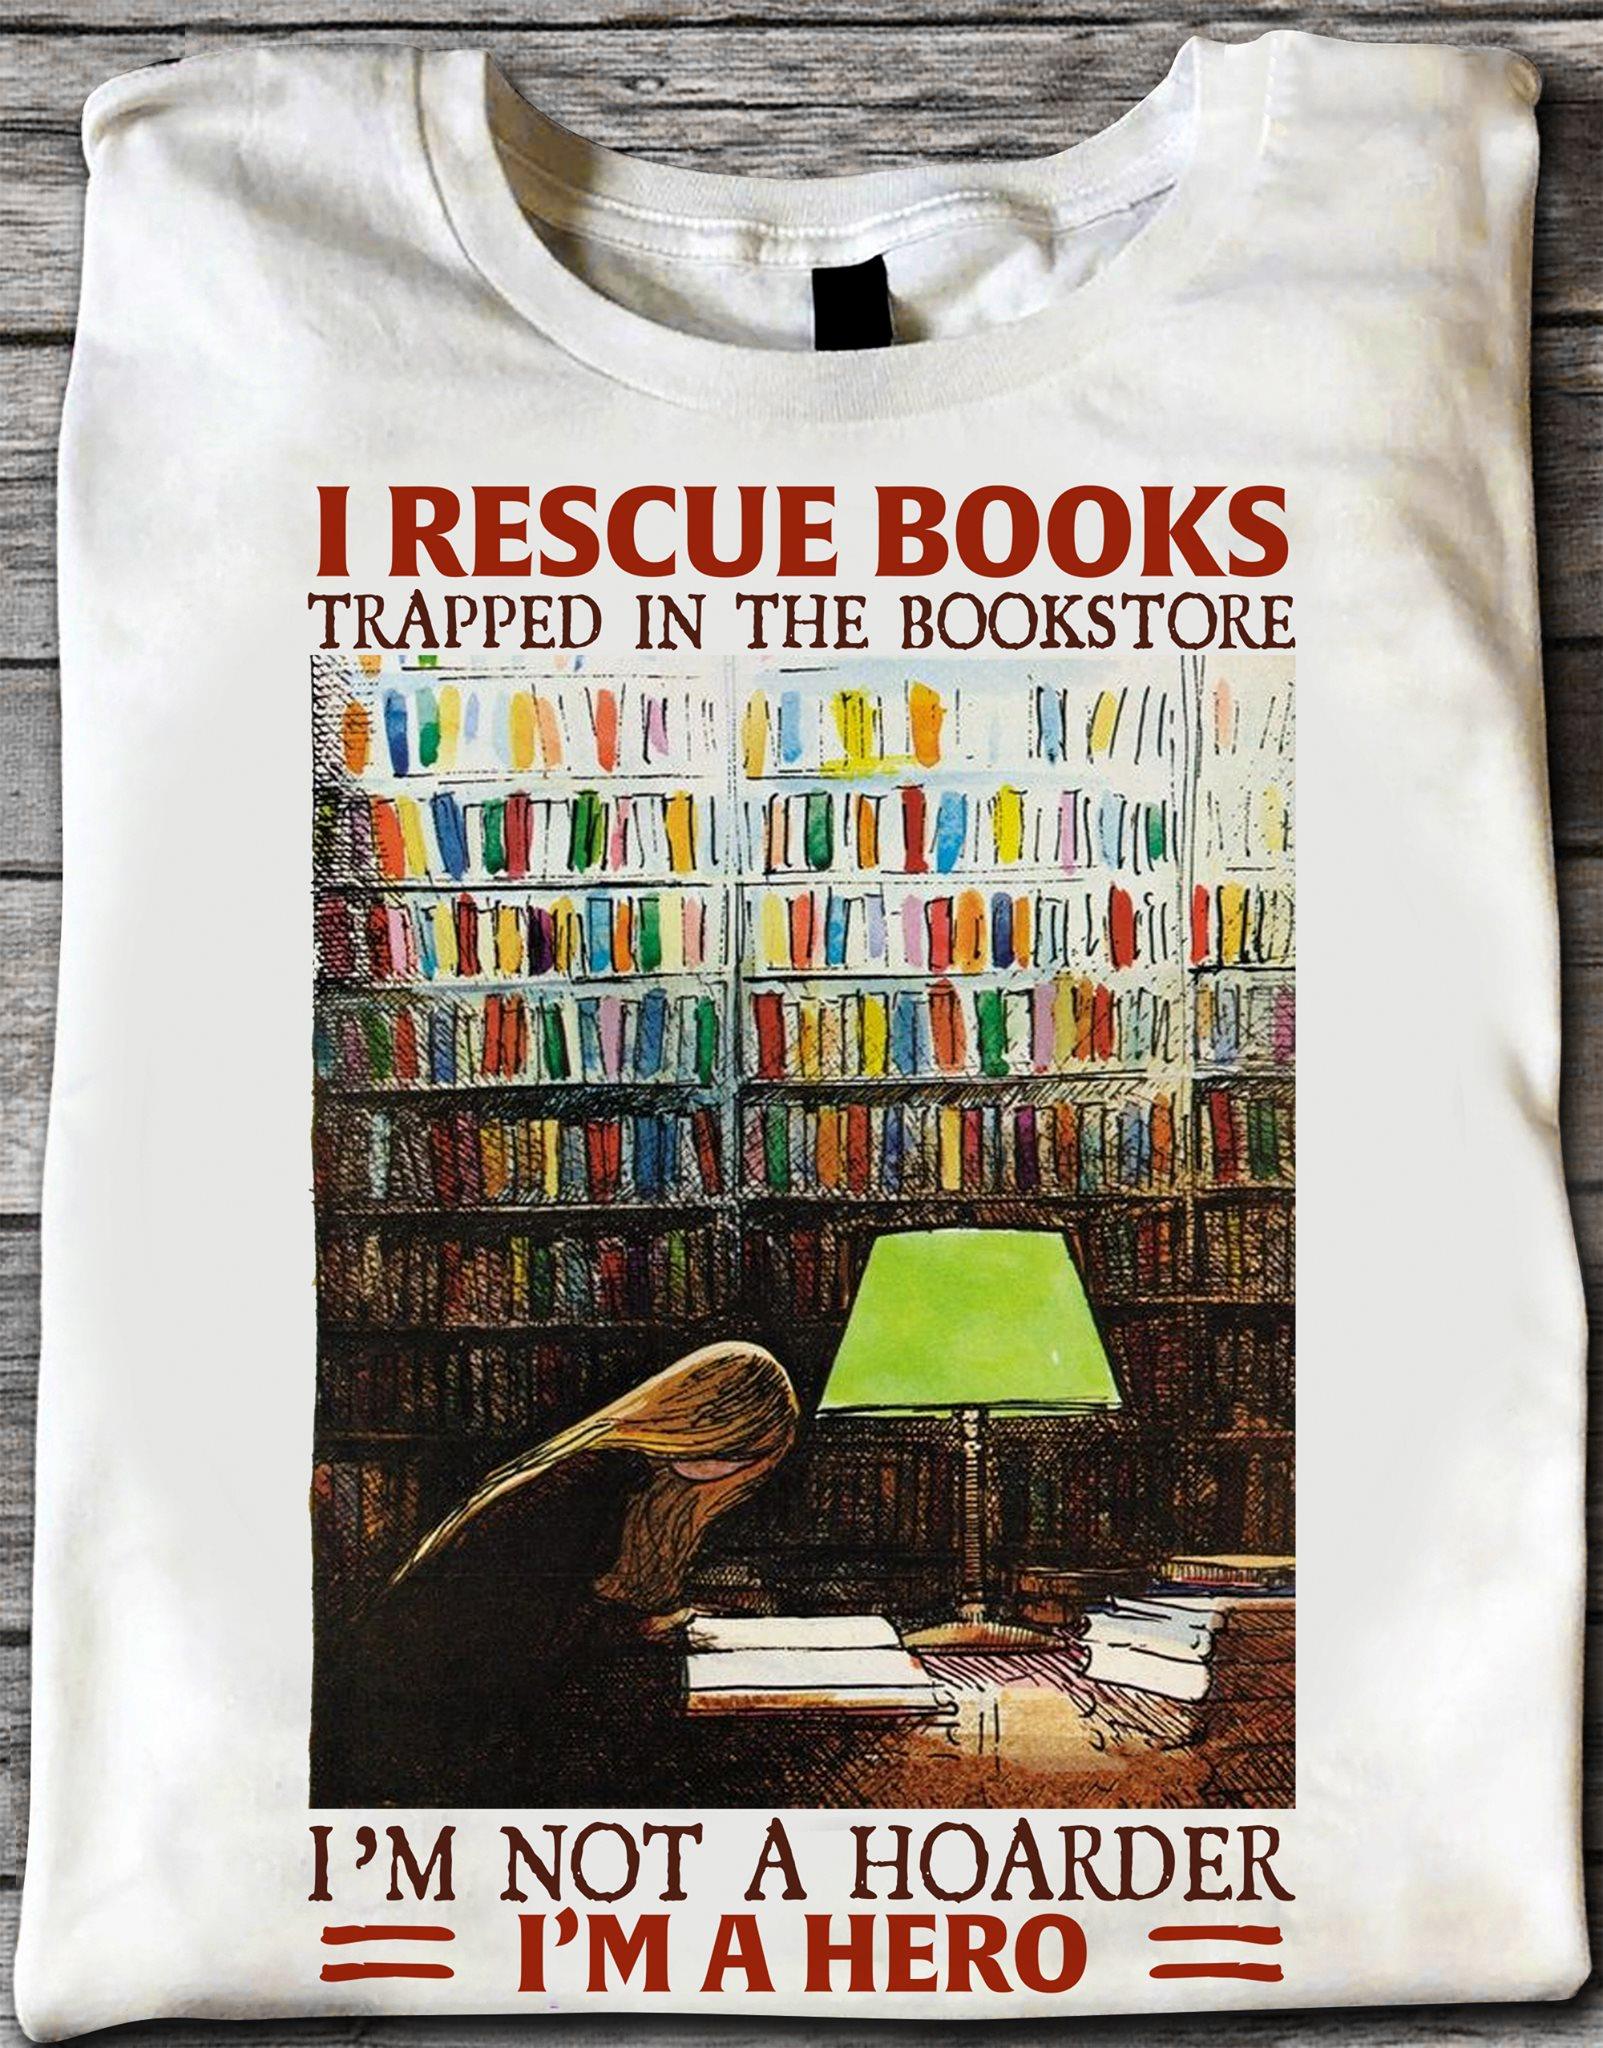 I rescue books trapped in the bookstore I'm not a hoarder I'm a hero - Book rescueing, gift for bookaholic, girl reading books